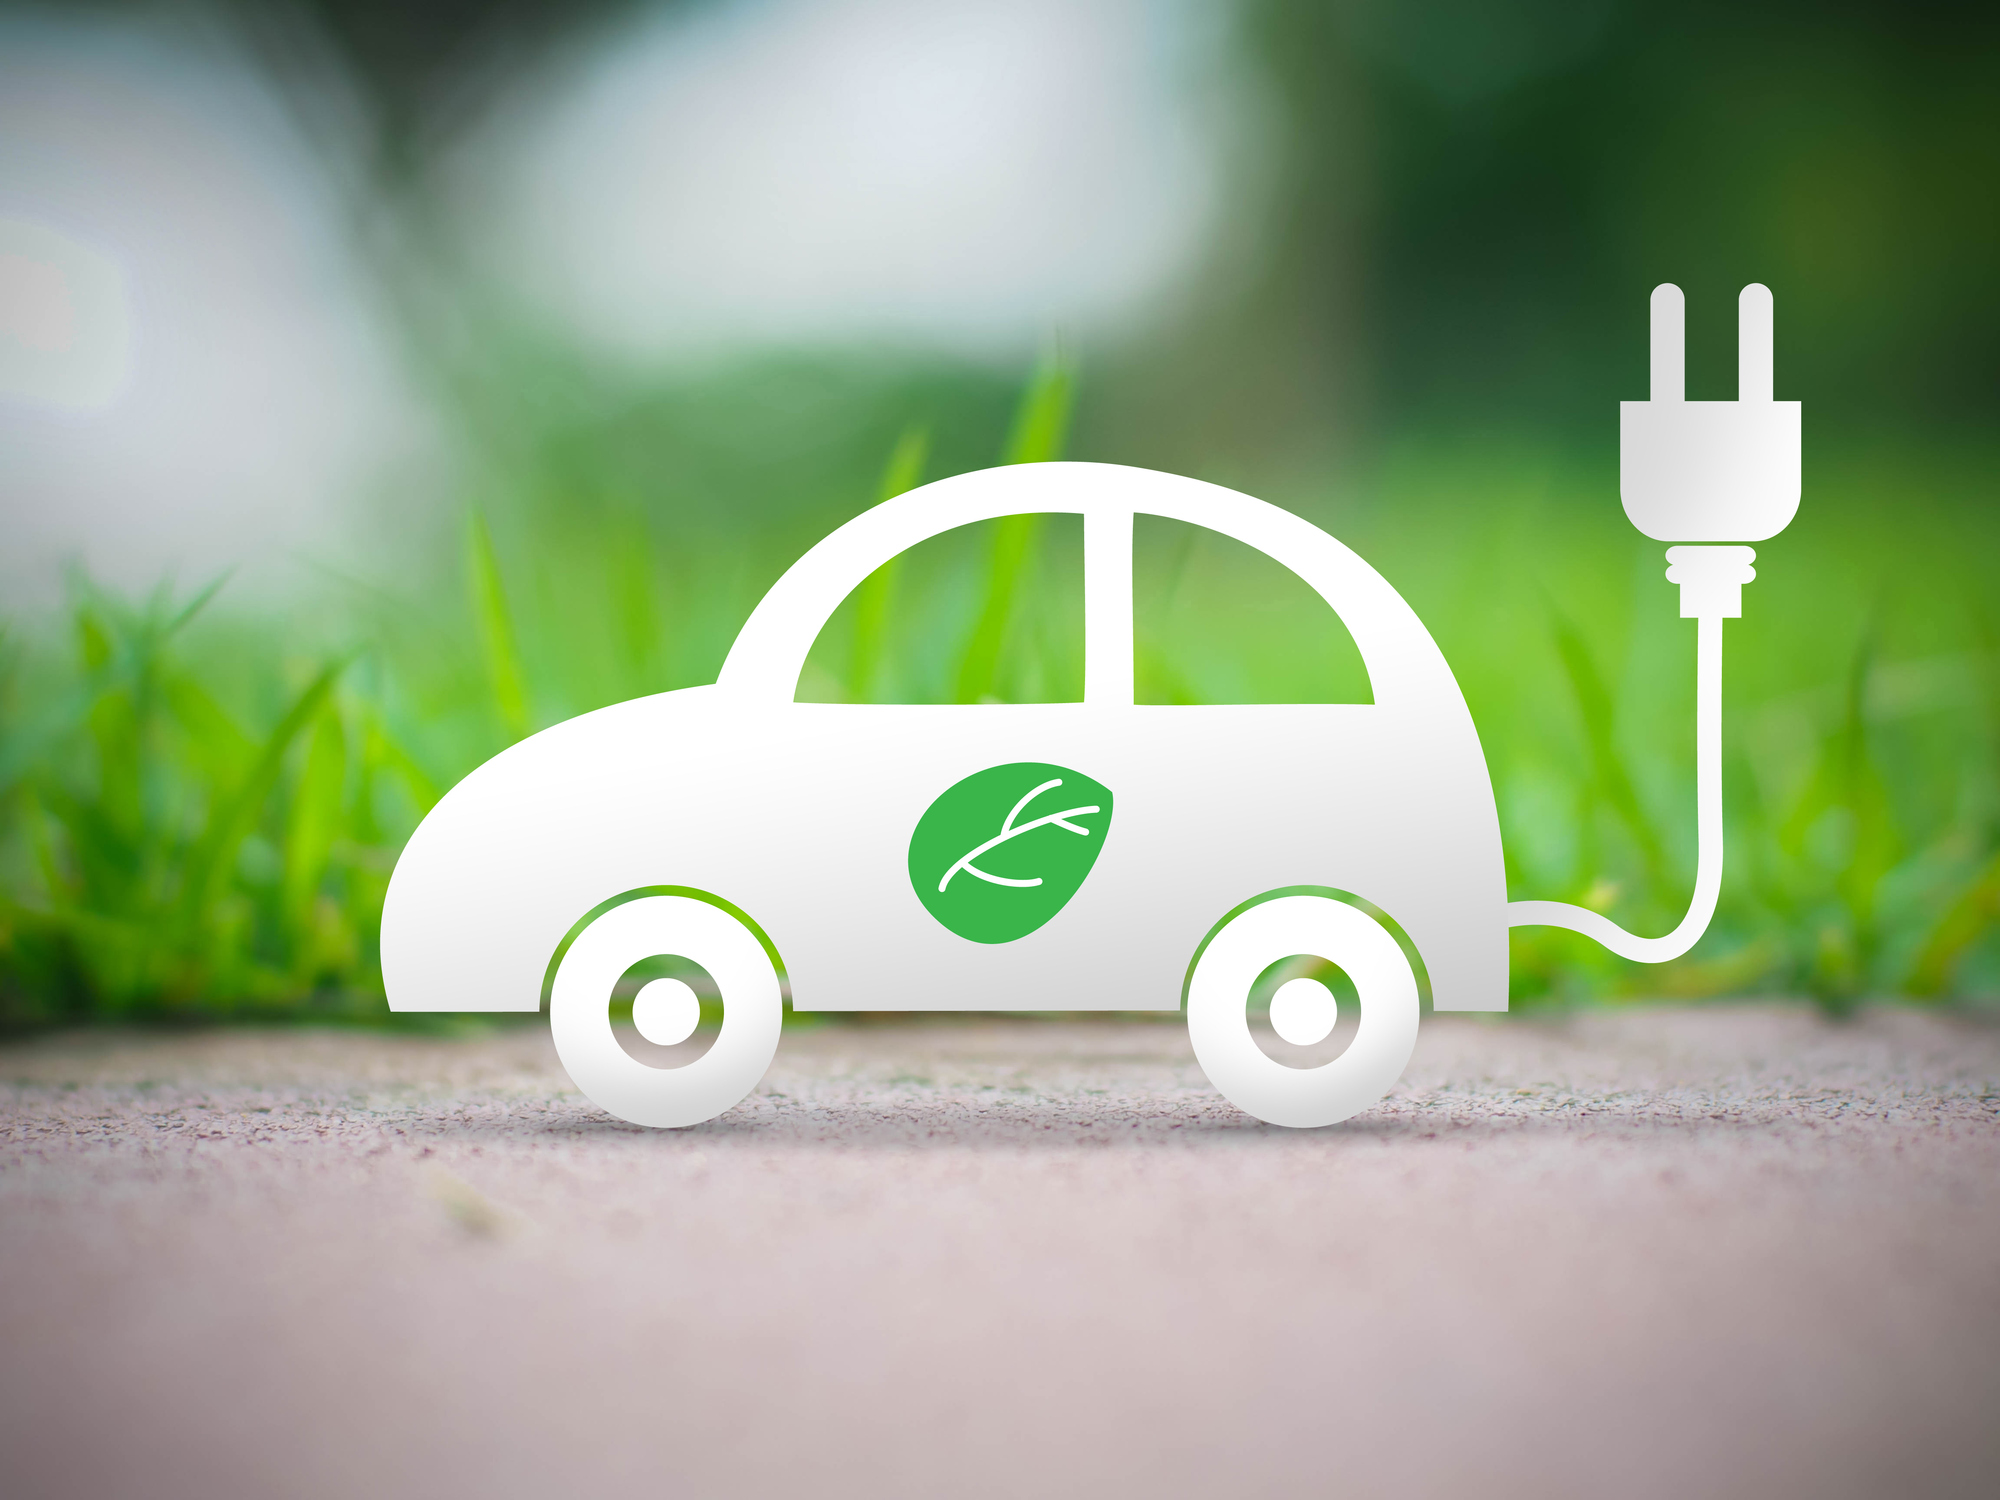 1,000 more electric chargers in the next 5 years 